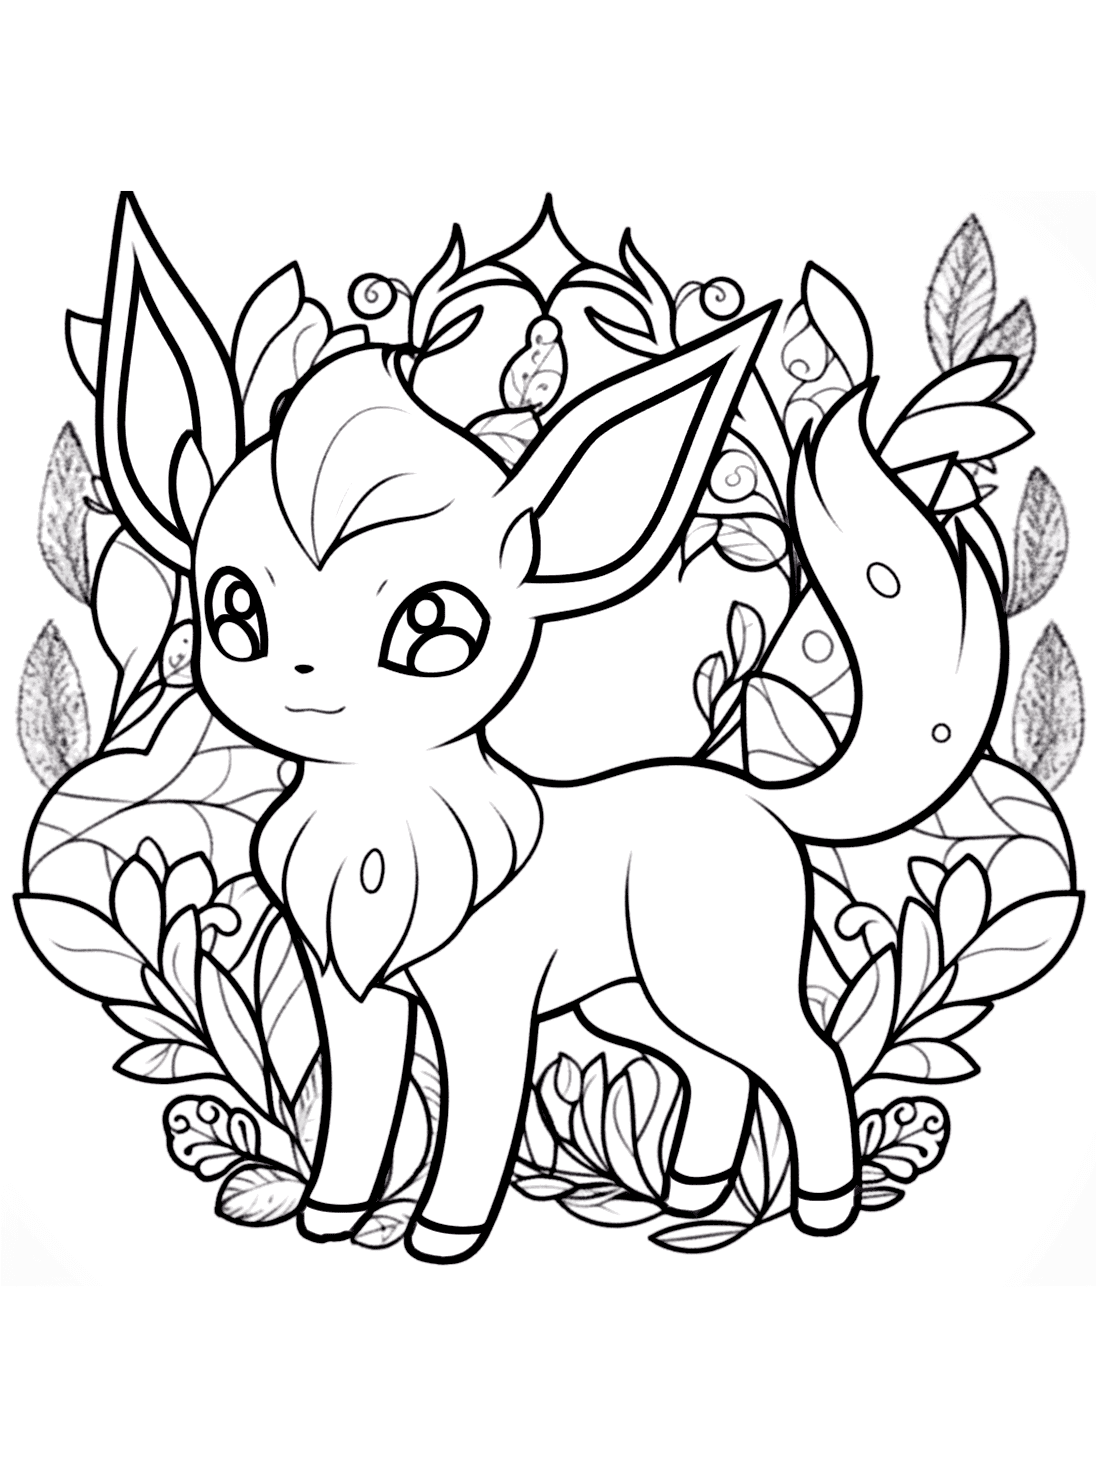 Pokemon Leafeon Coloring Pages